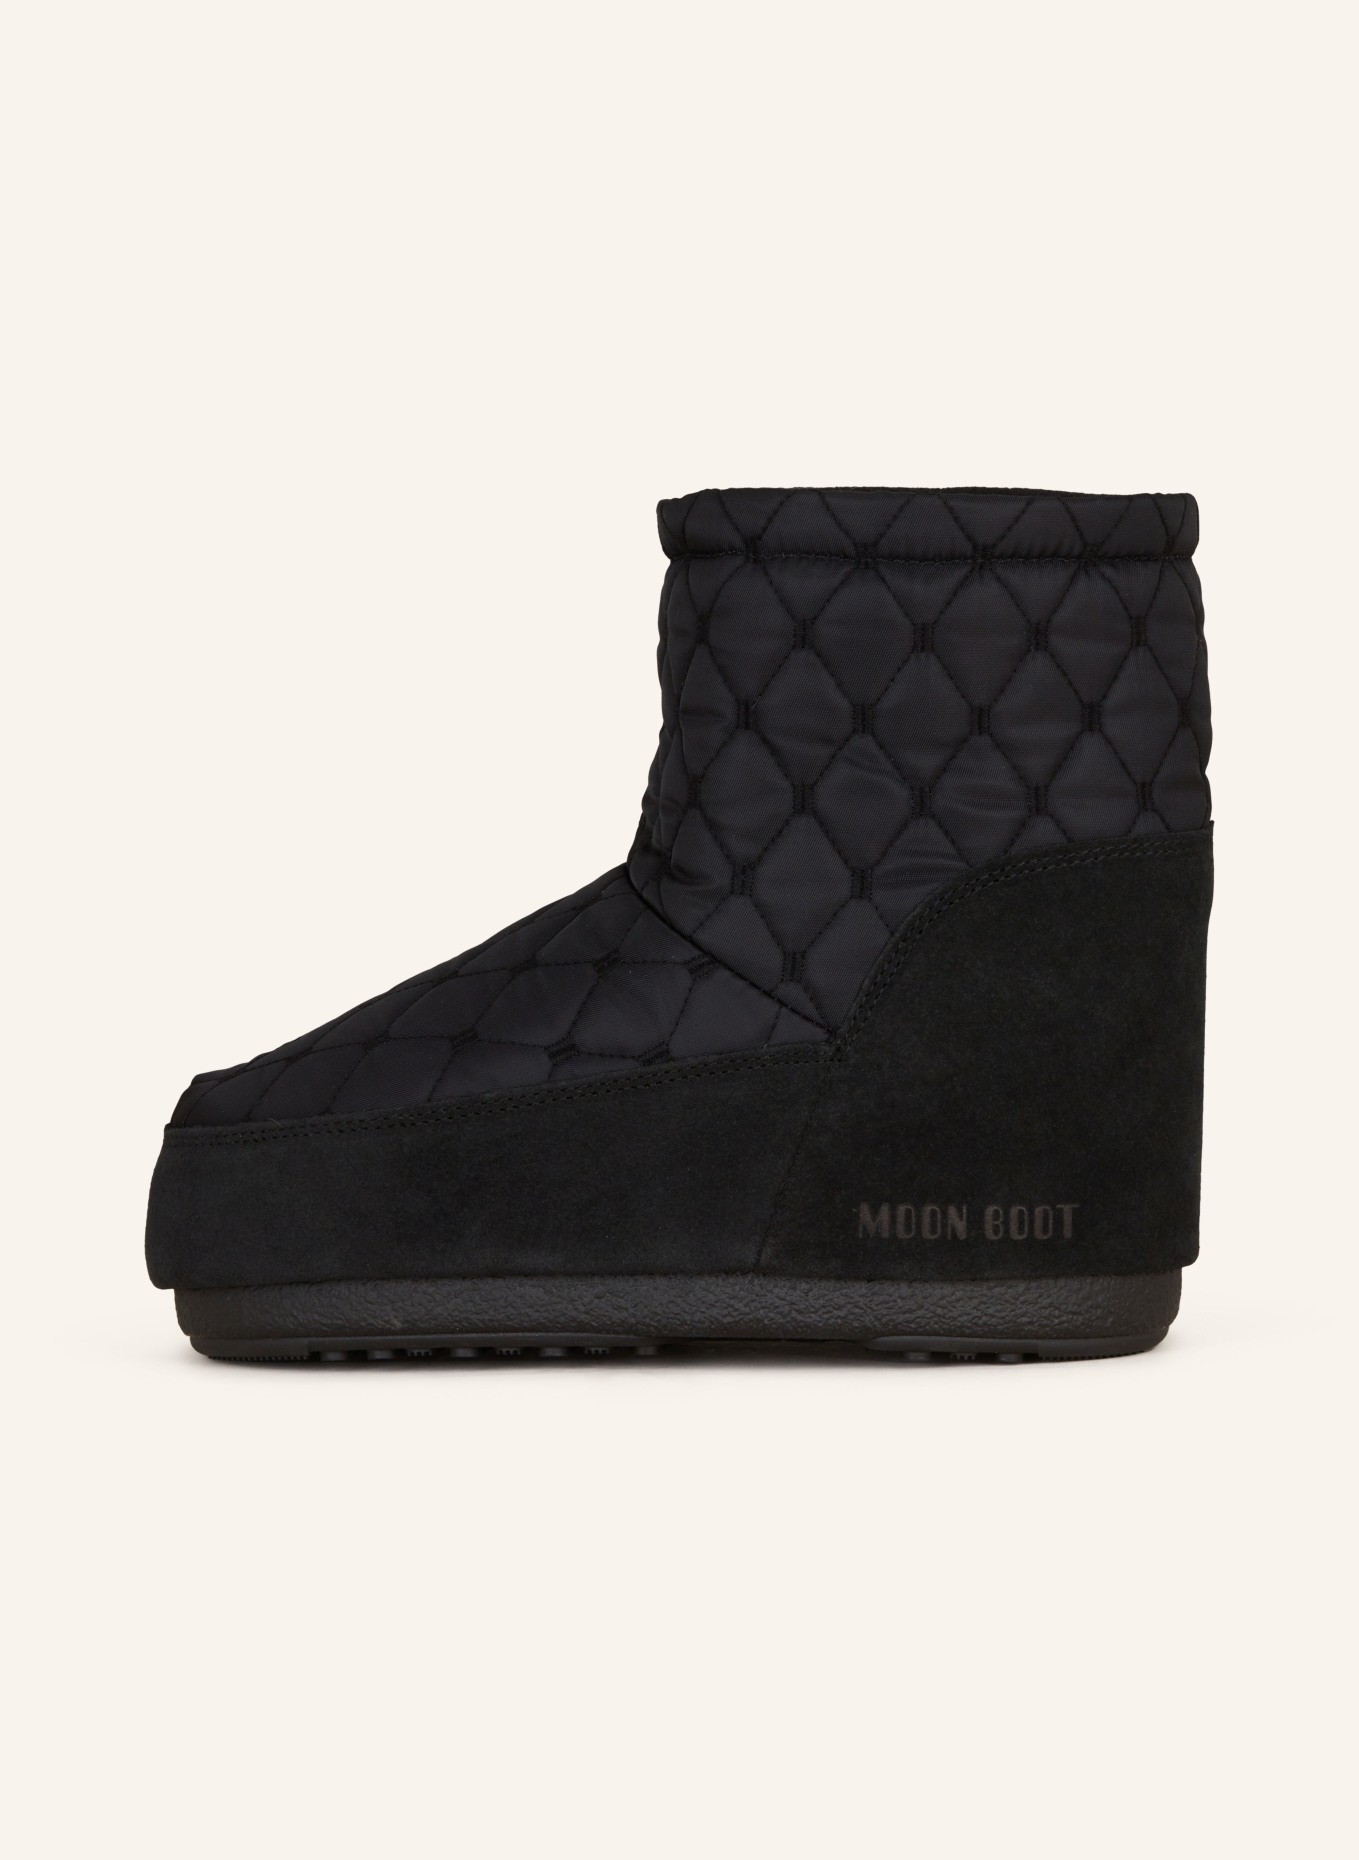 MOON BOOT Moon Boots ICON LOW NOLACE QUILTED, Farbe: SCHWARZ (Bild 4)